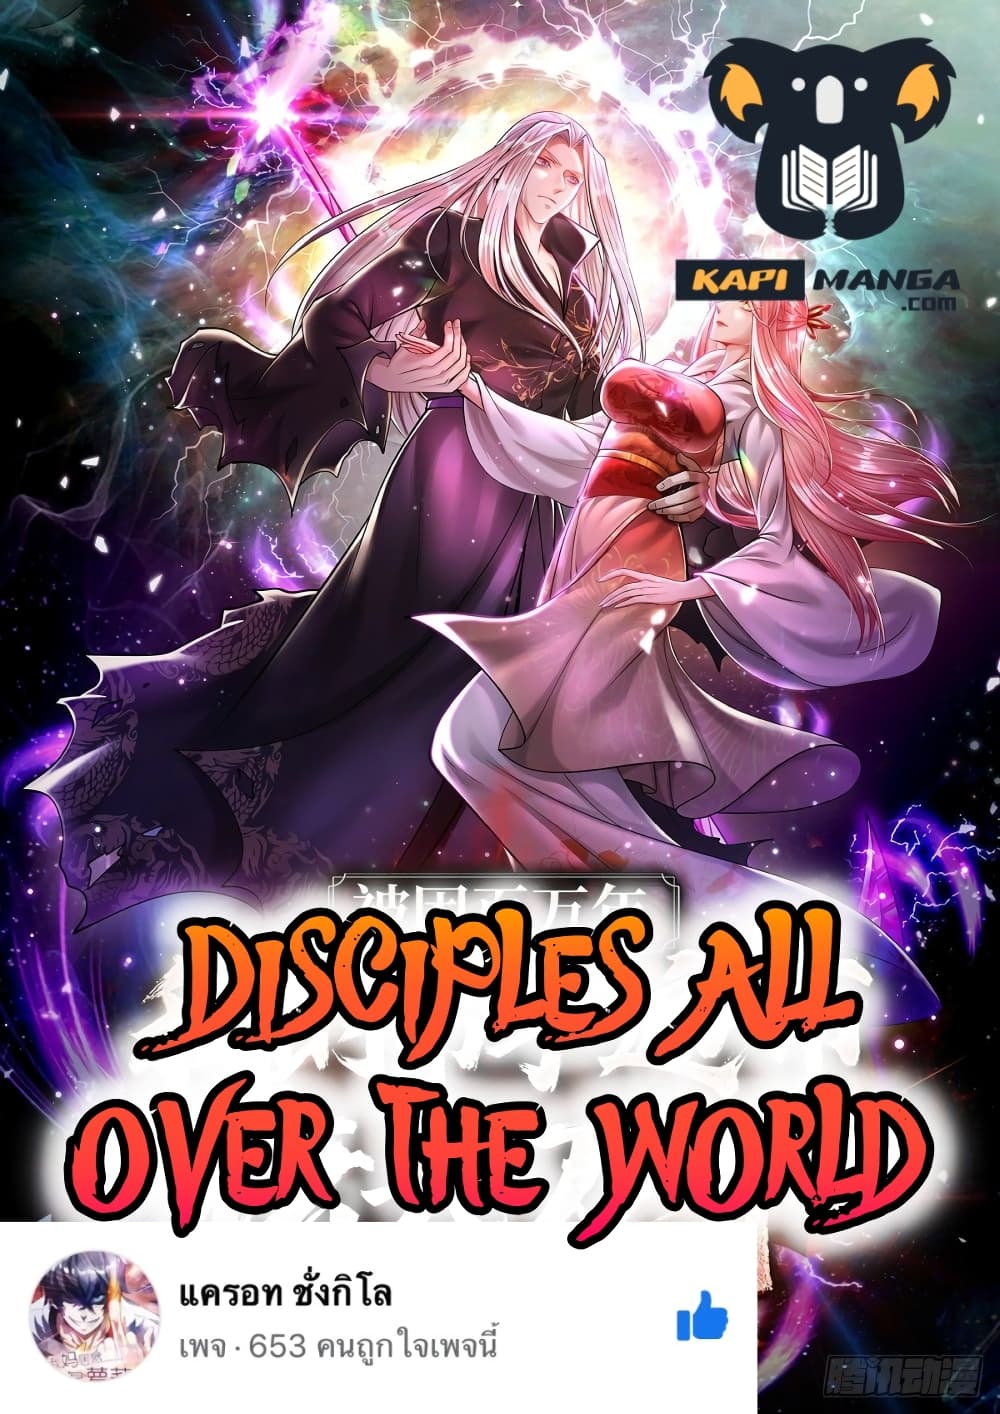 Disciples All Over the World 221 01